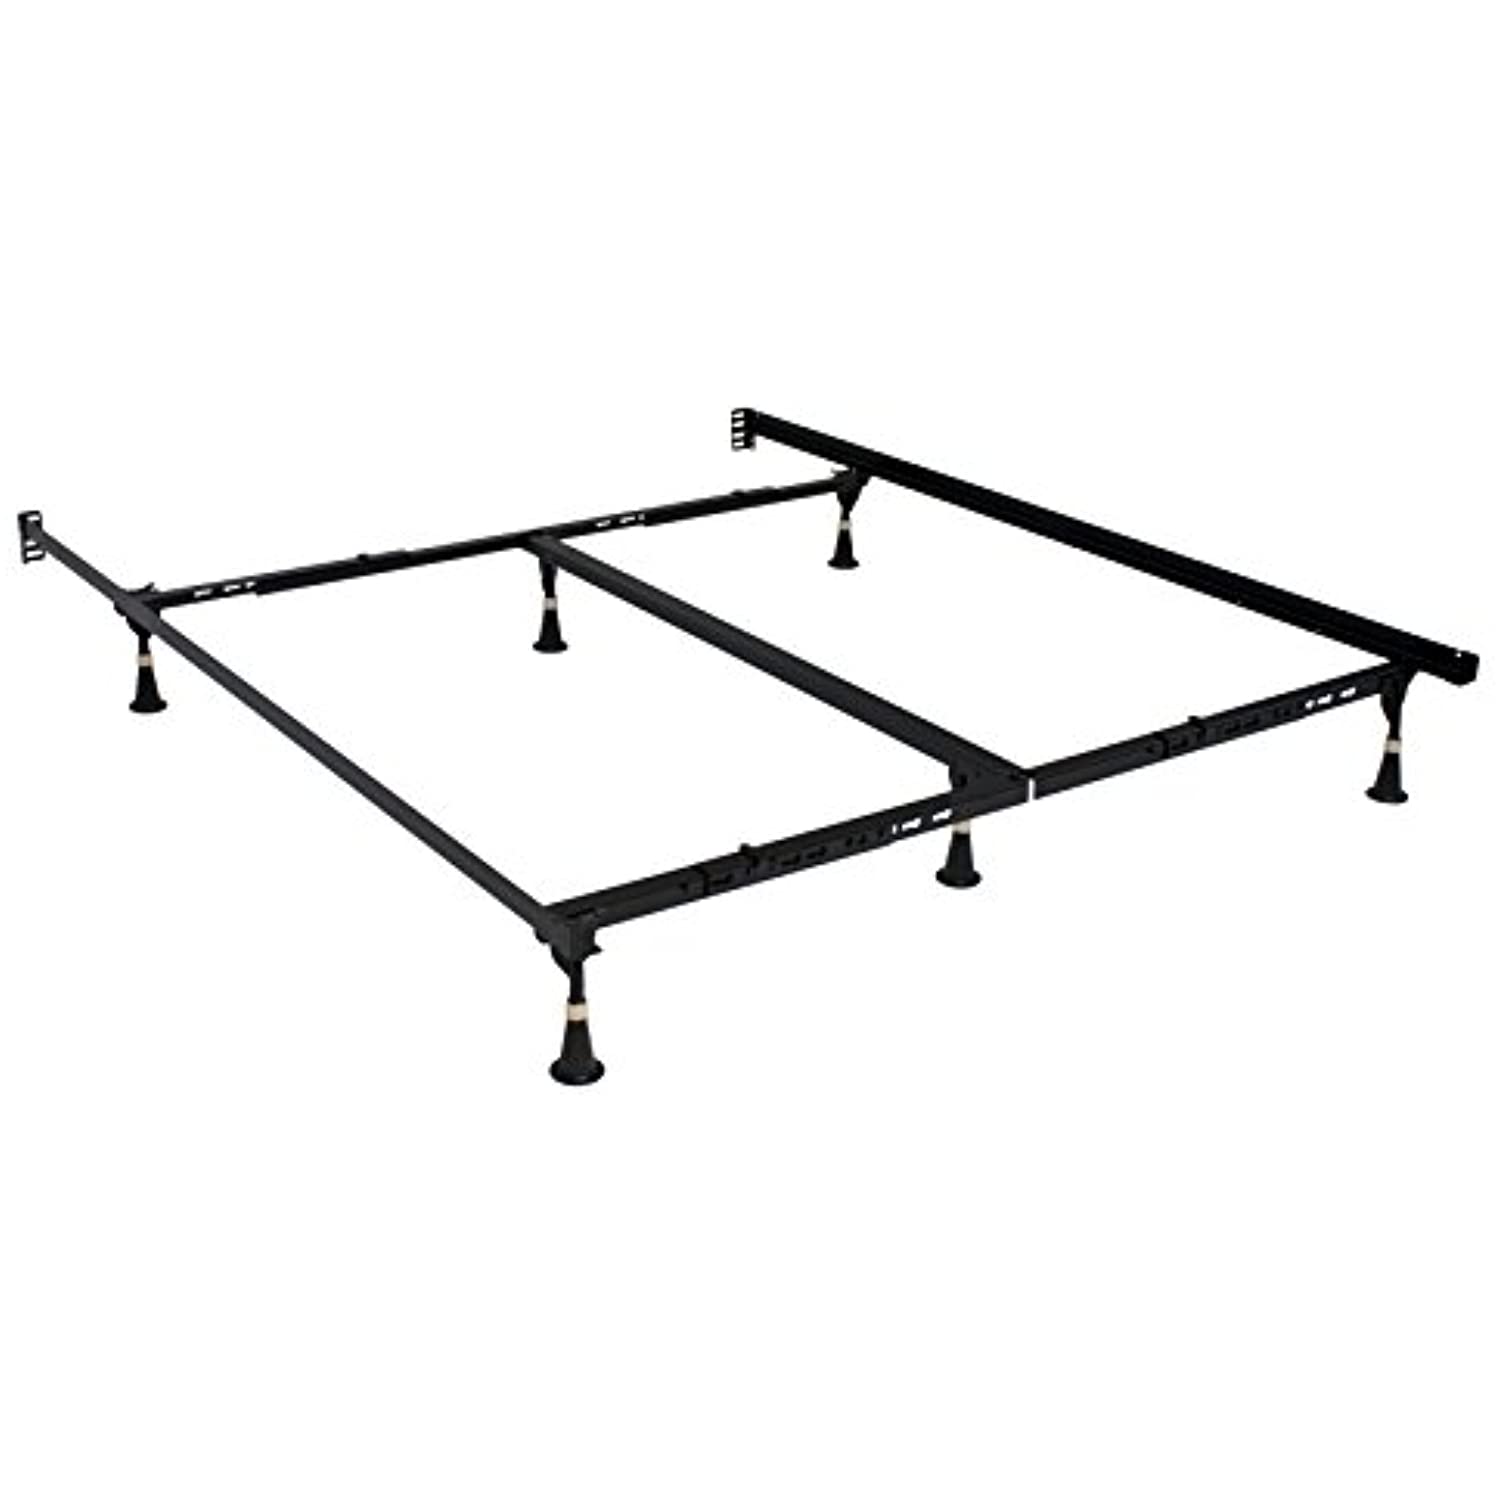 Hollywood Bed Frames Serta Stabl-Base Premium Elite Bed Frame Twin/Full/Queen/Cal King/E. King with 6 Glides - image 1 of 2